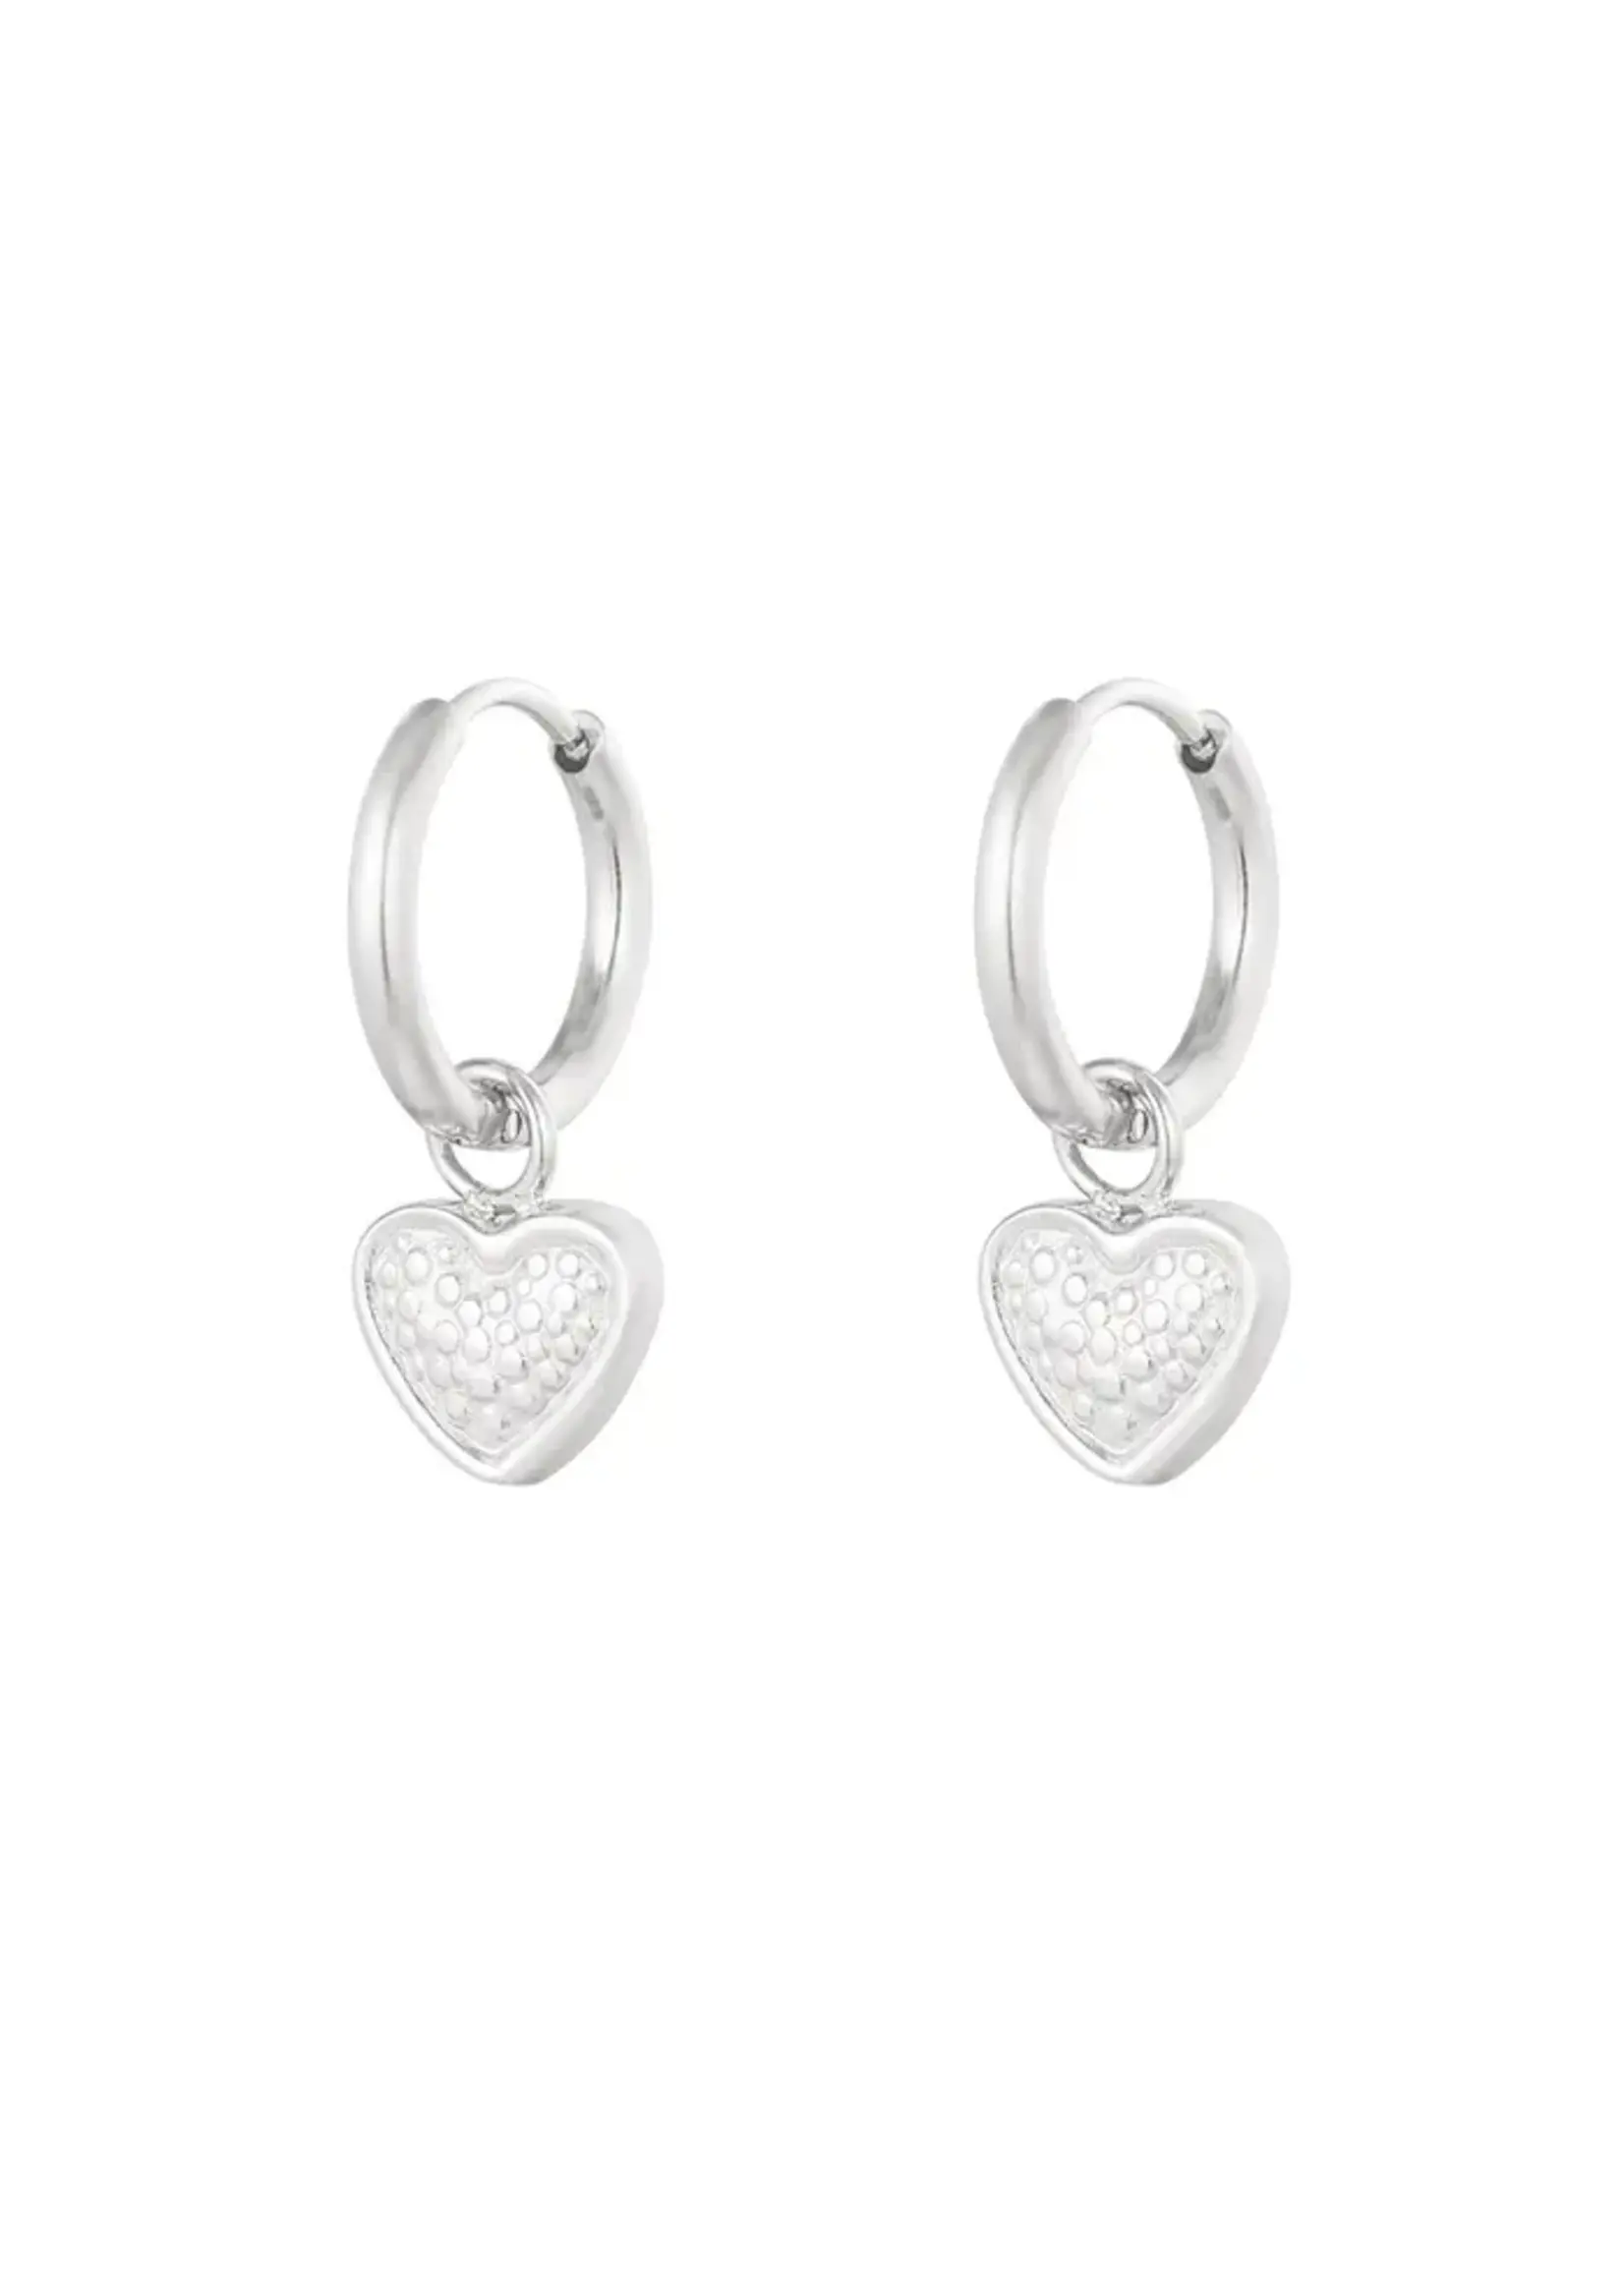 Earrings Heart With Print Silver